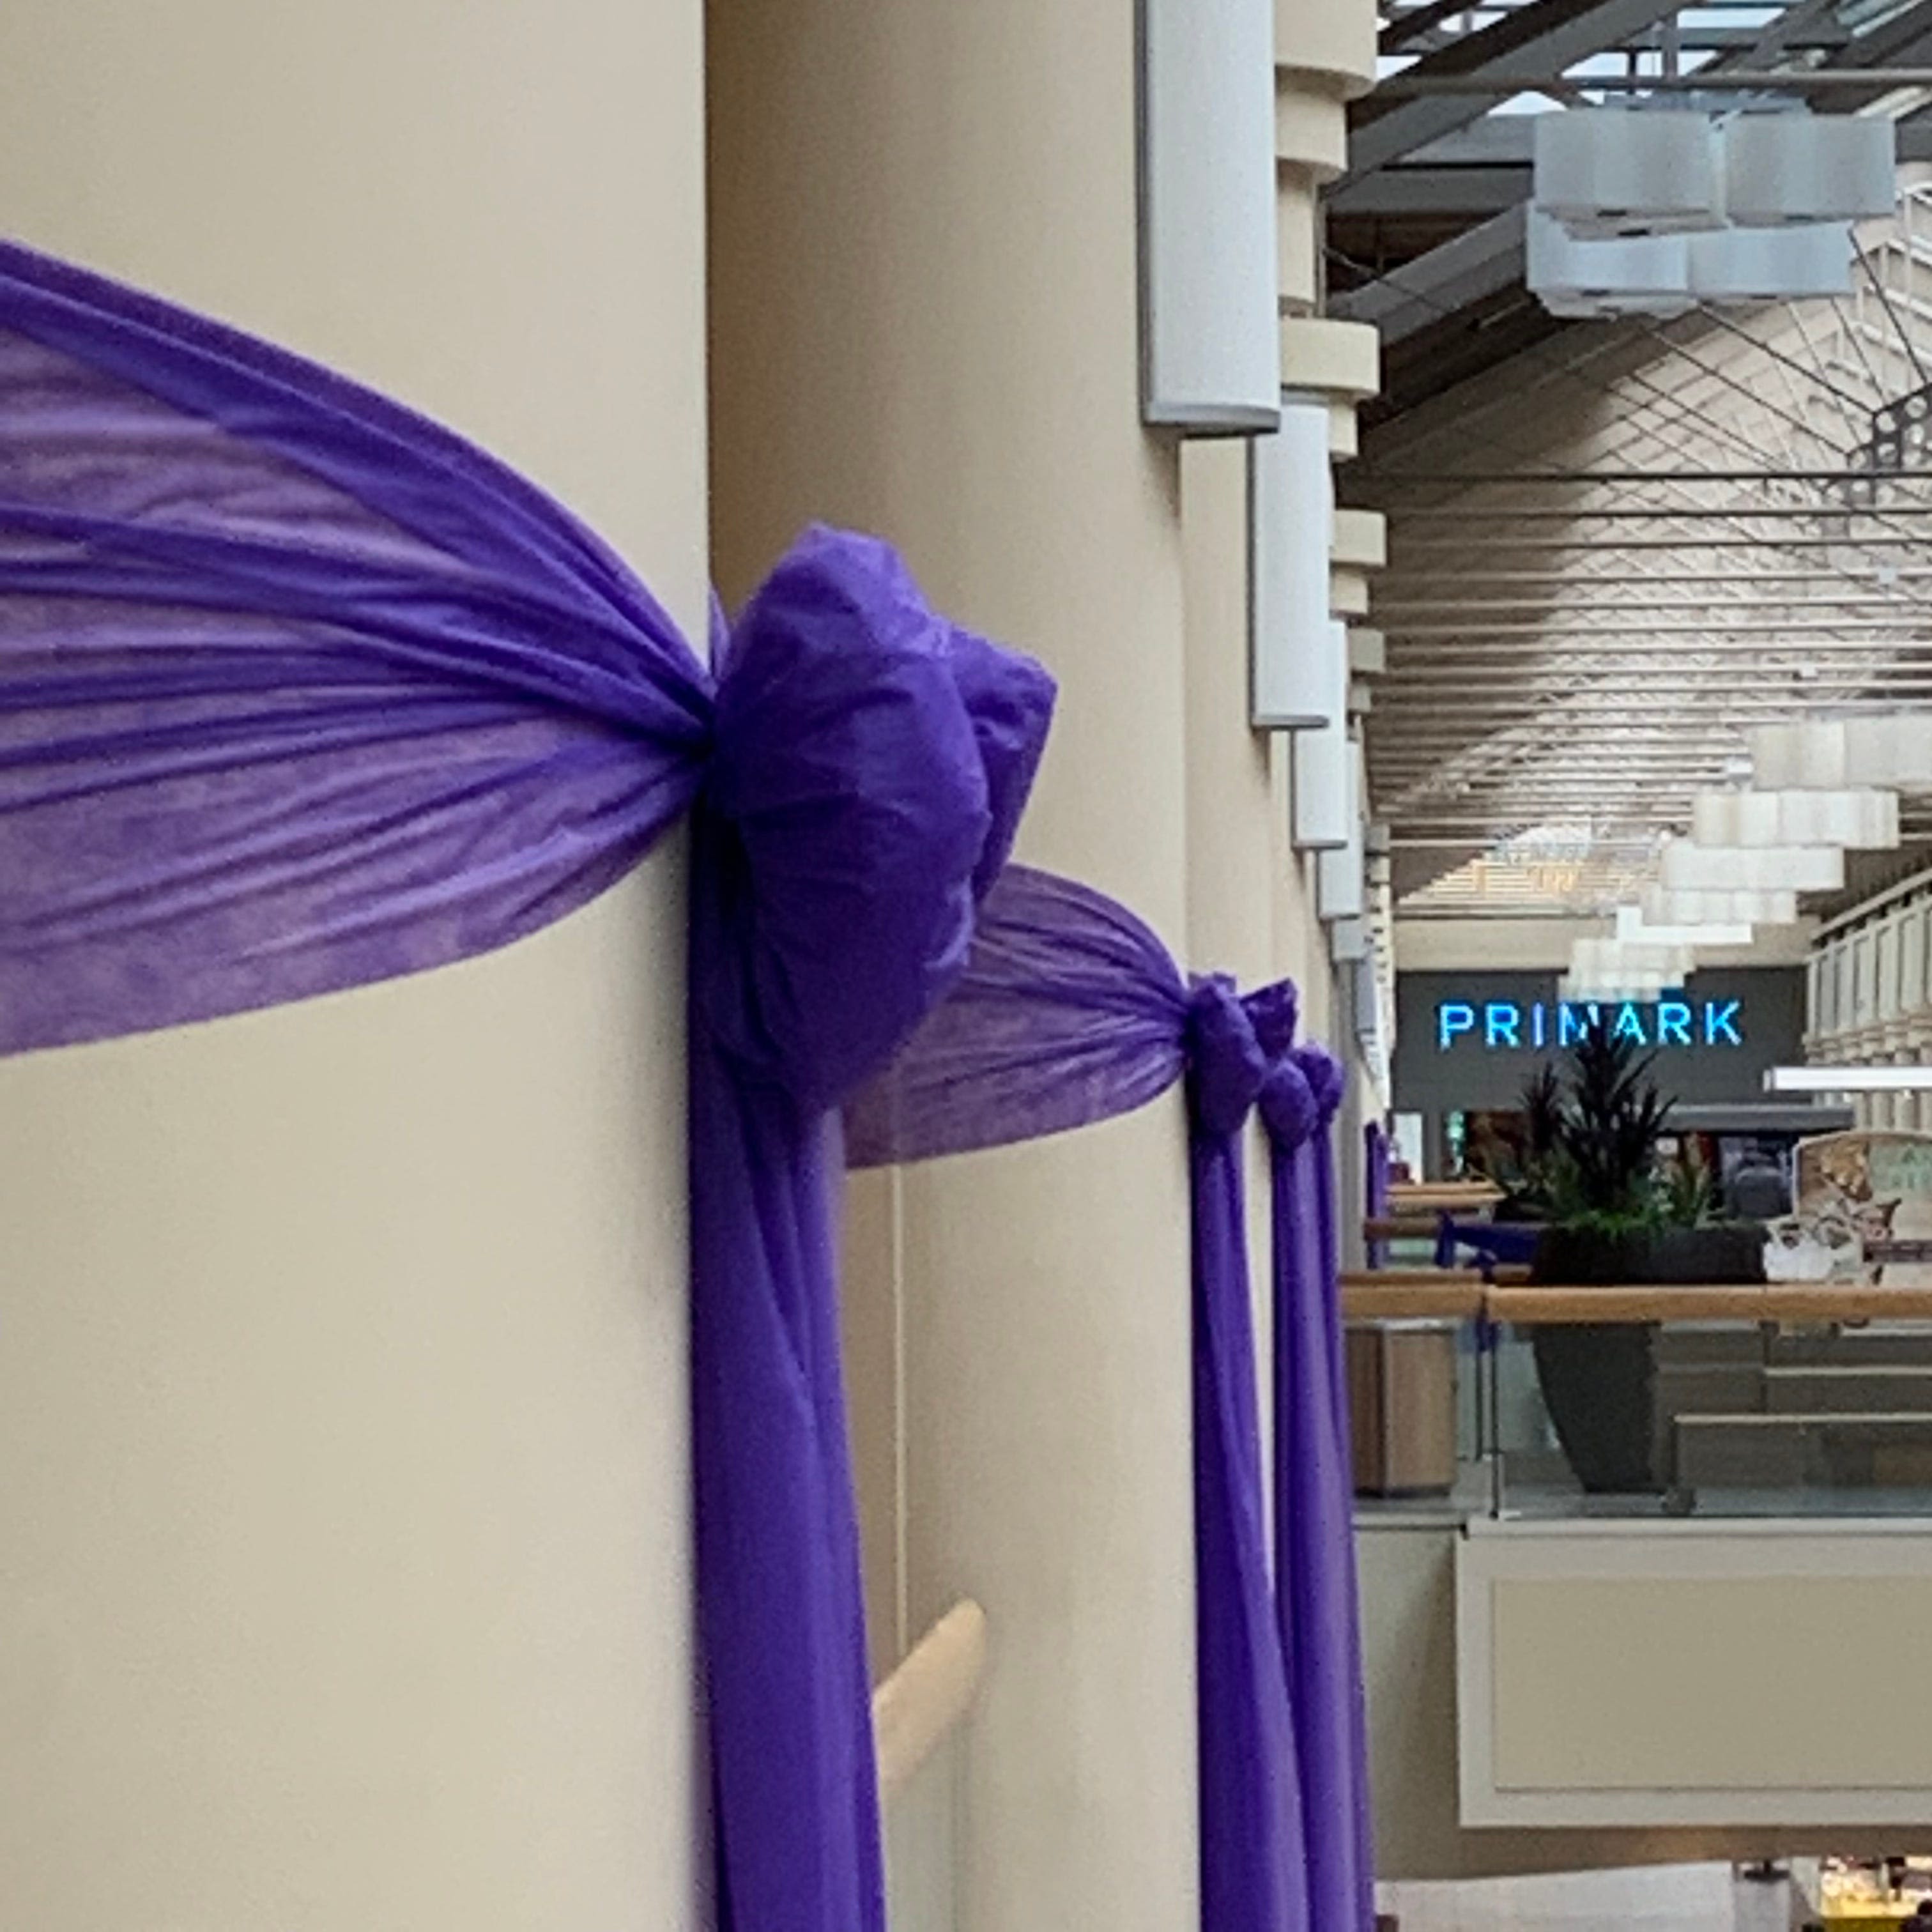 Freehold Raceway Mall going purple with free mental health event